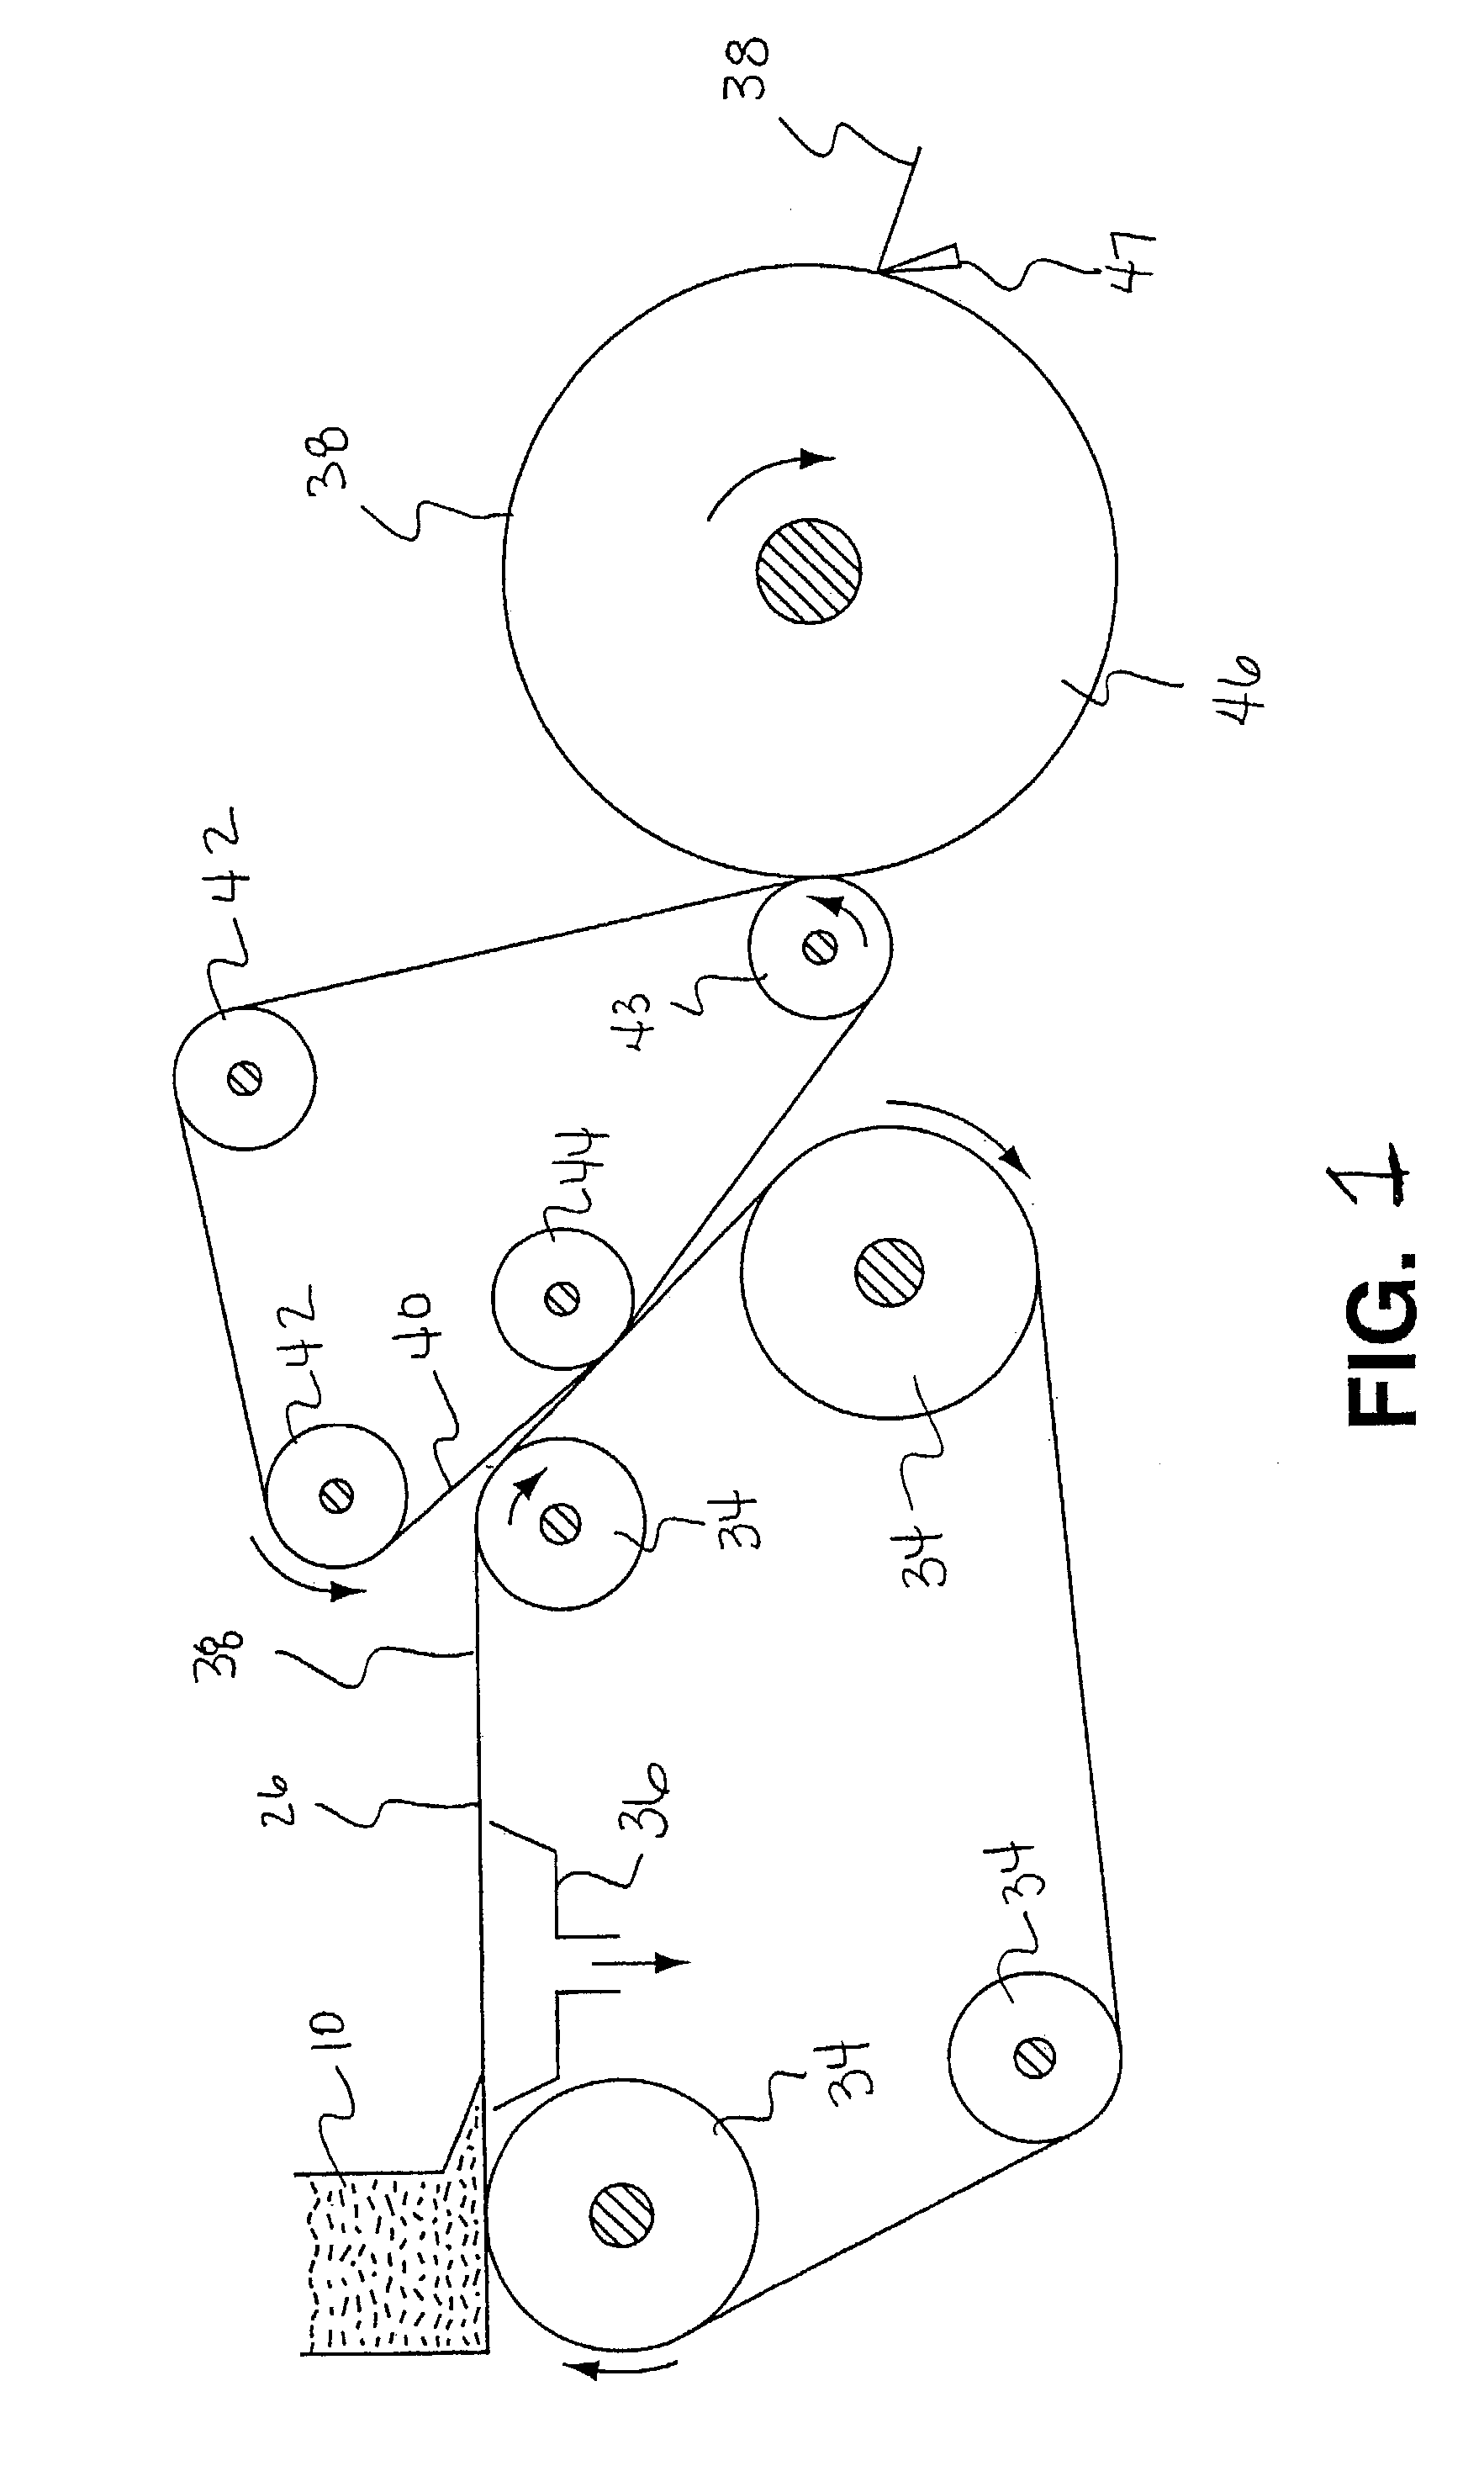 Wiping products having a low coefficient of friction in the wet state and process for producing same